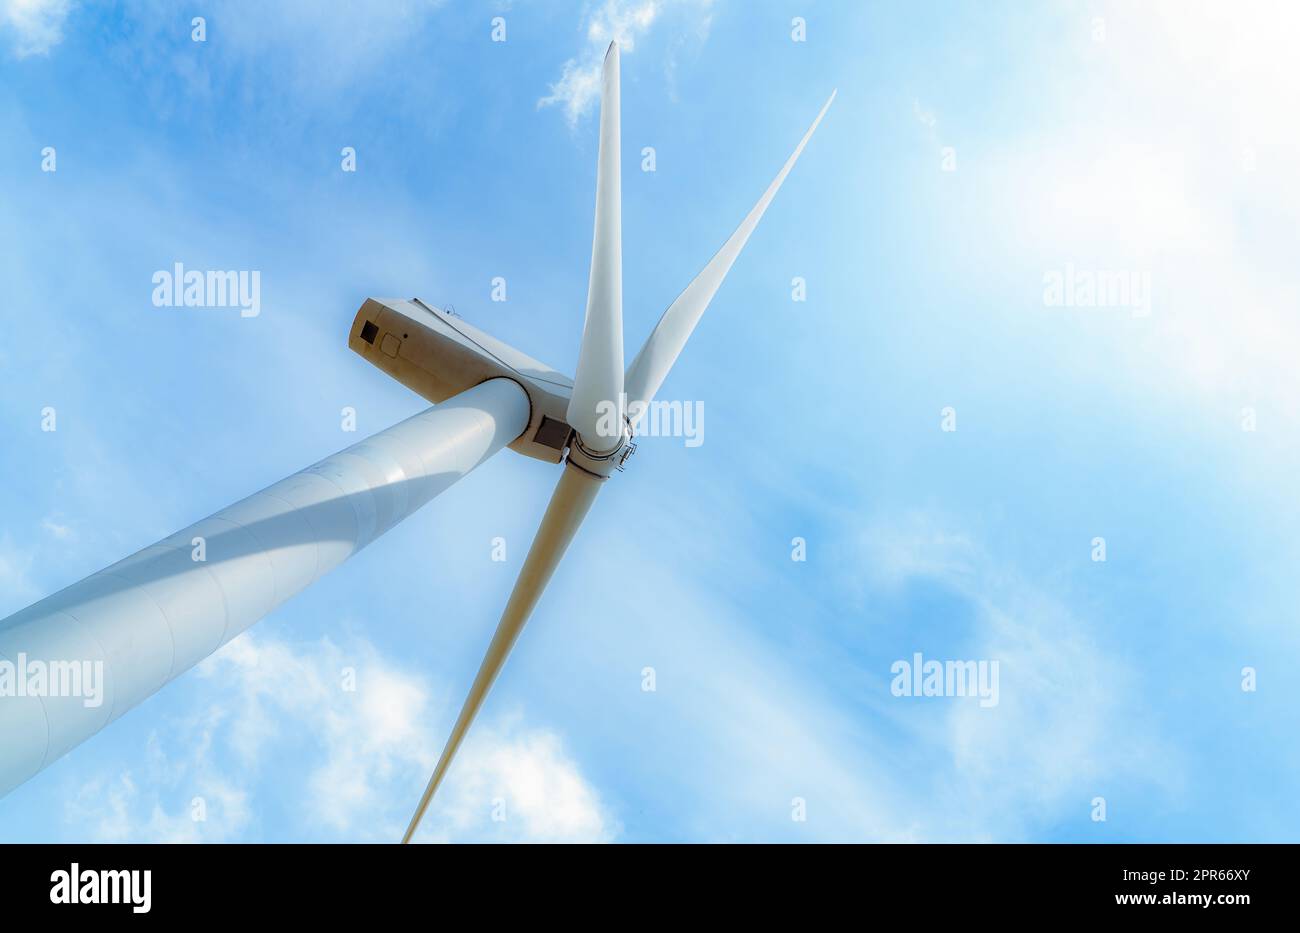 Wind energy. Wind power. Sustainable, renewable energy. Wind turbines generate electricity. Windmill against blue sky and sun light. Green technology. Renewable resource. Sustainable development. Stock Photo